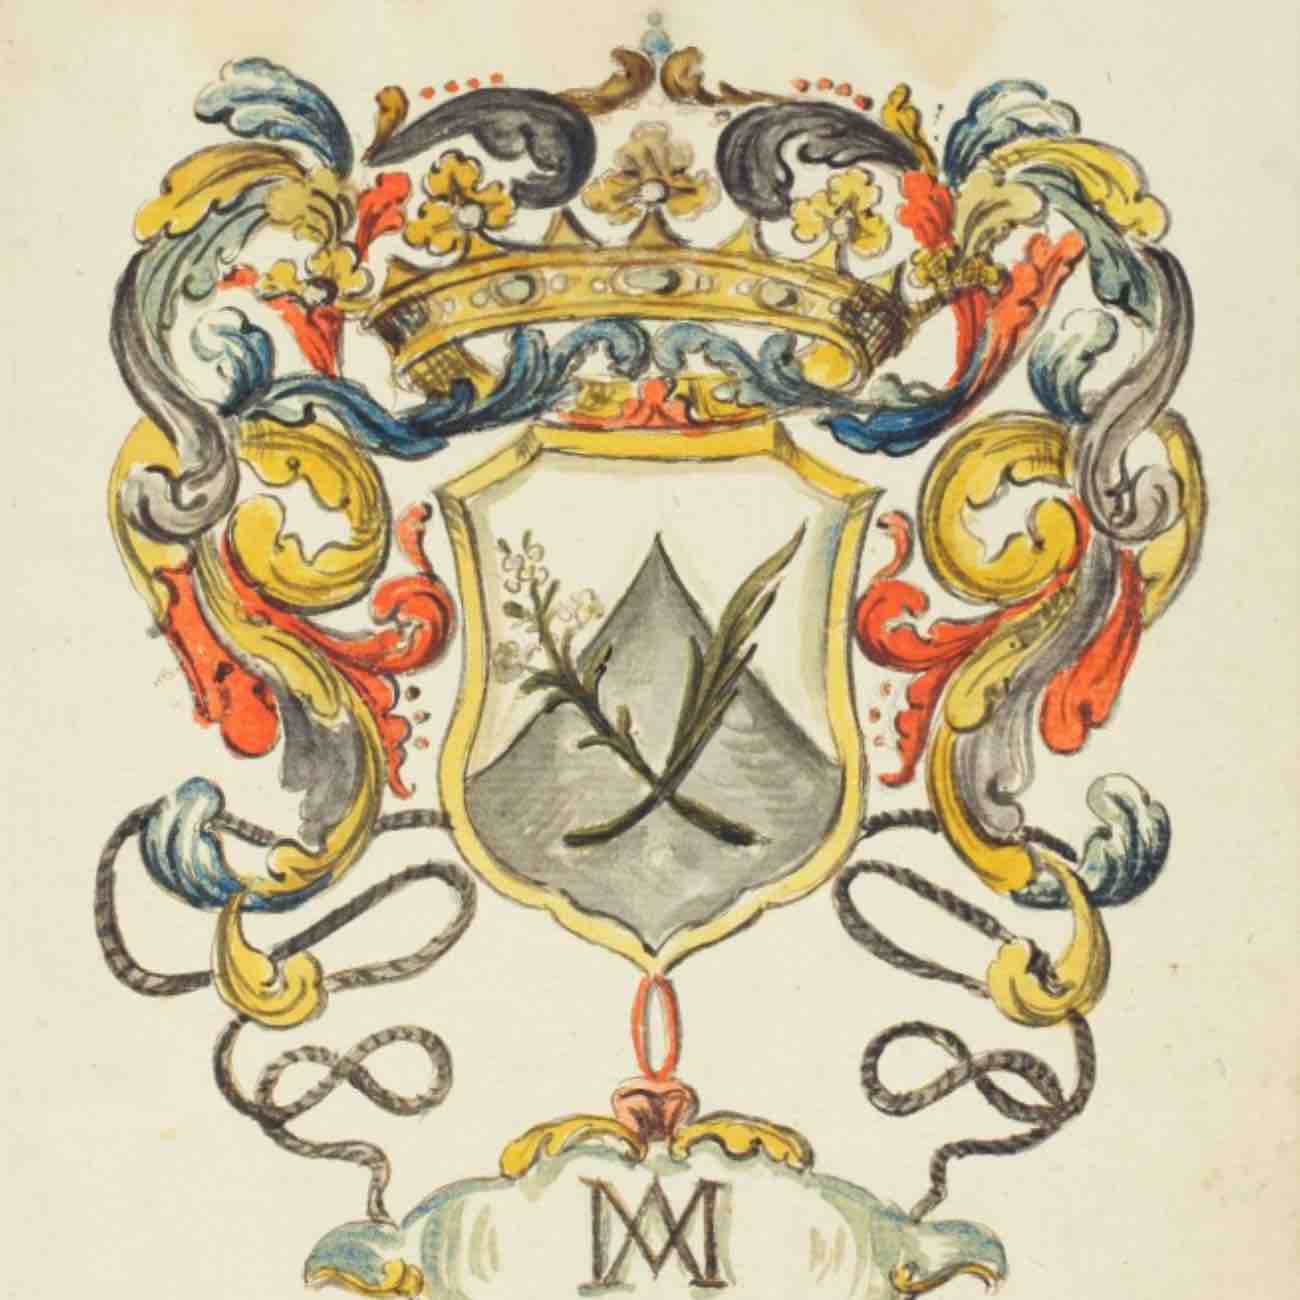 Coat of arms of the Archconfraternity of Our Lady of Mount Carmel. (<a href='https://w3id.org/vhmml/readingRoom/view/236567'>ACMC 00030</a>)